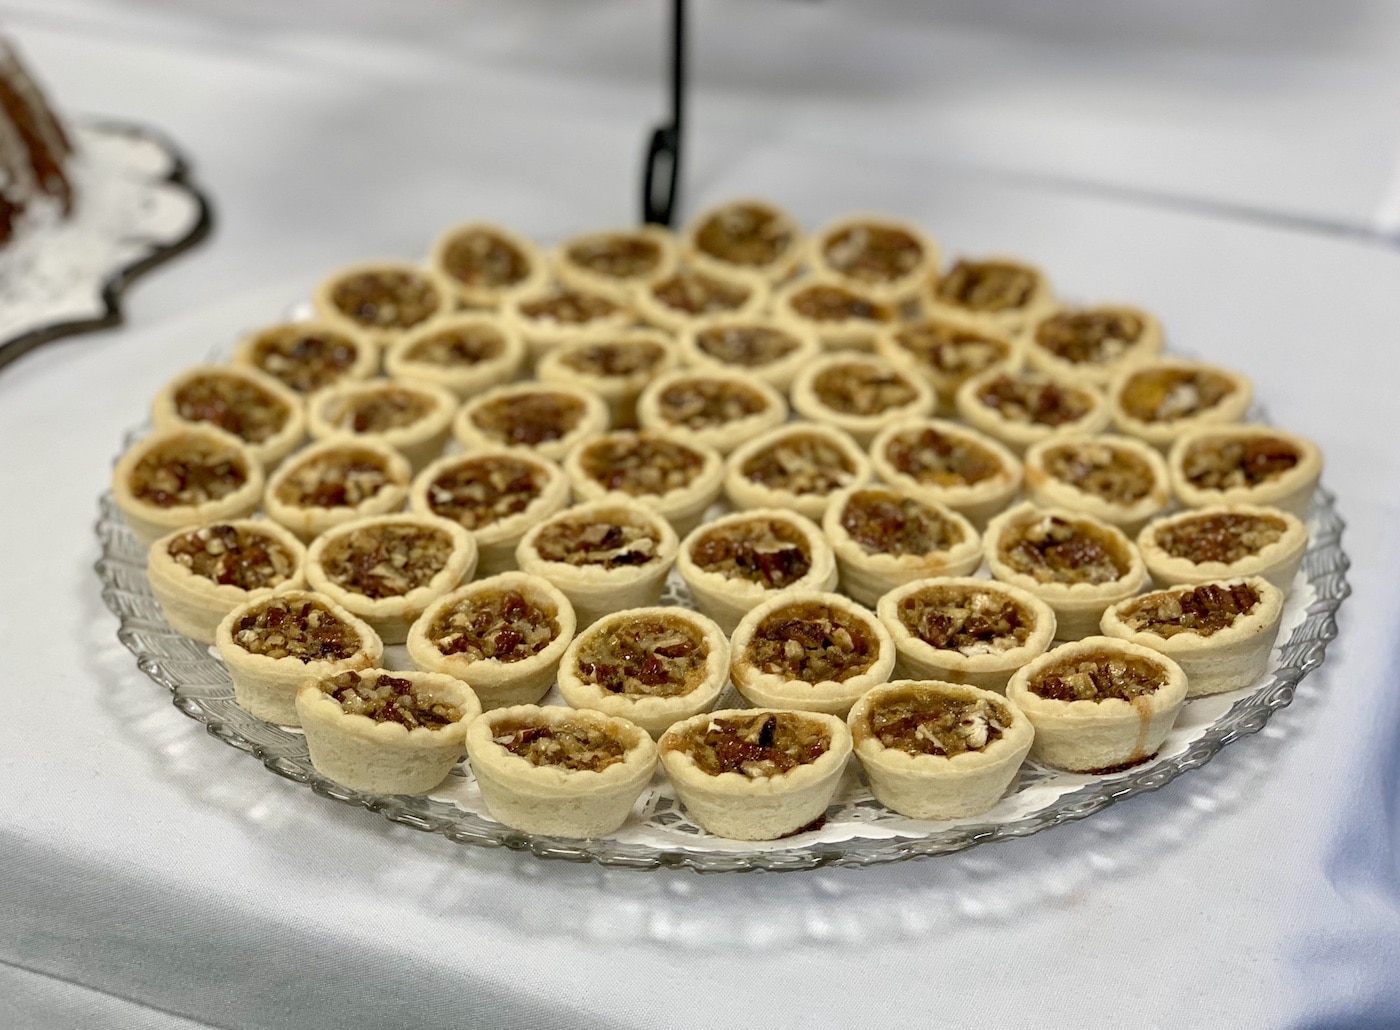 Miniature southern-style pecan pies.